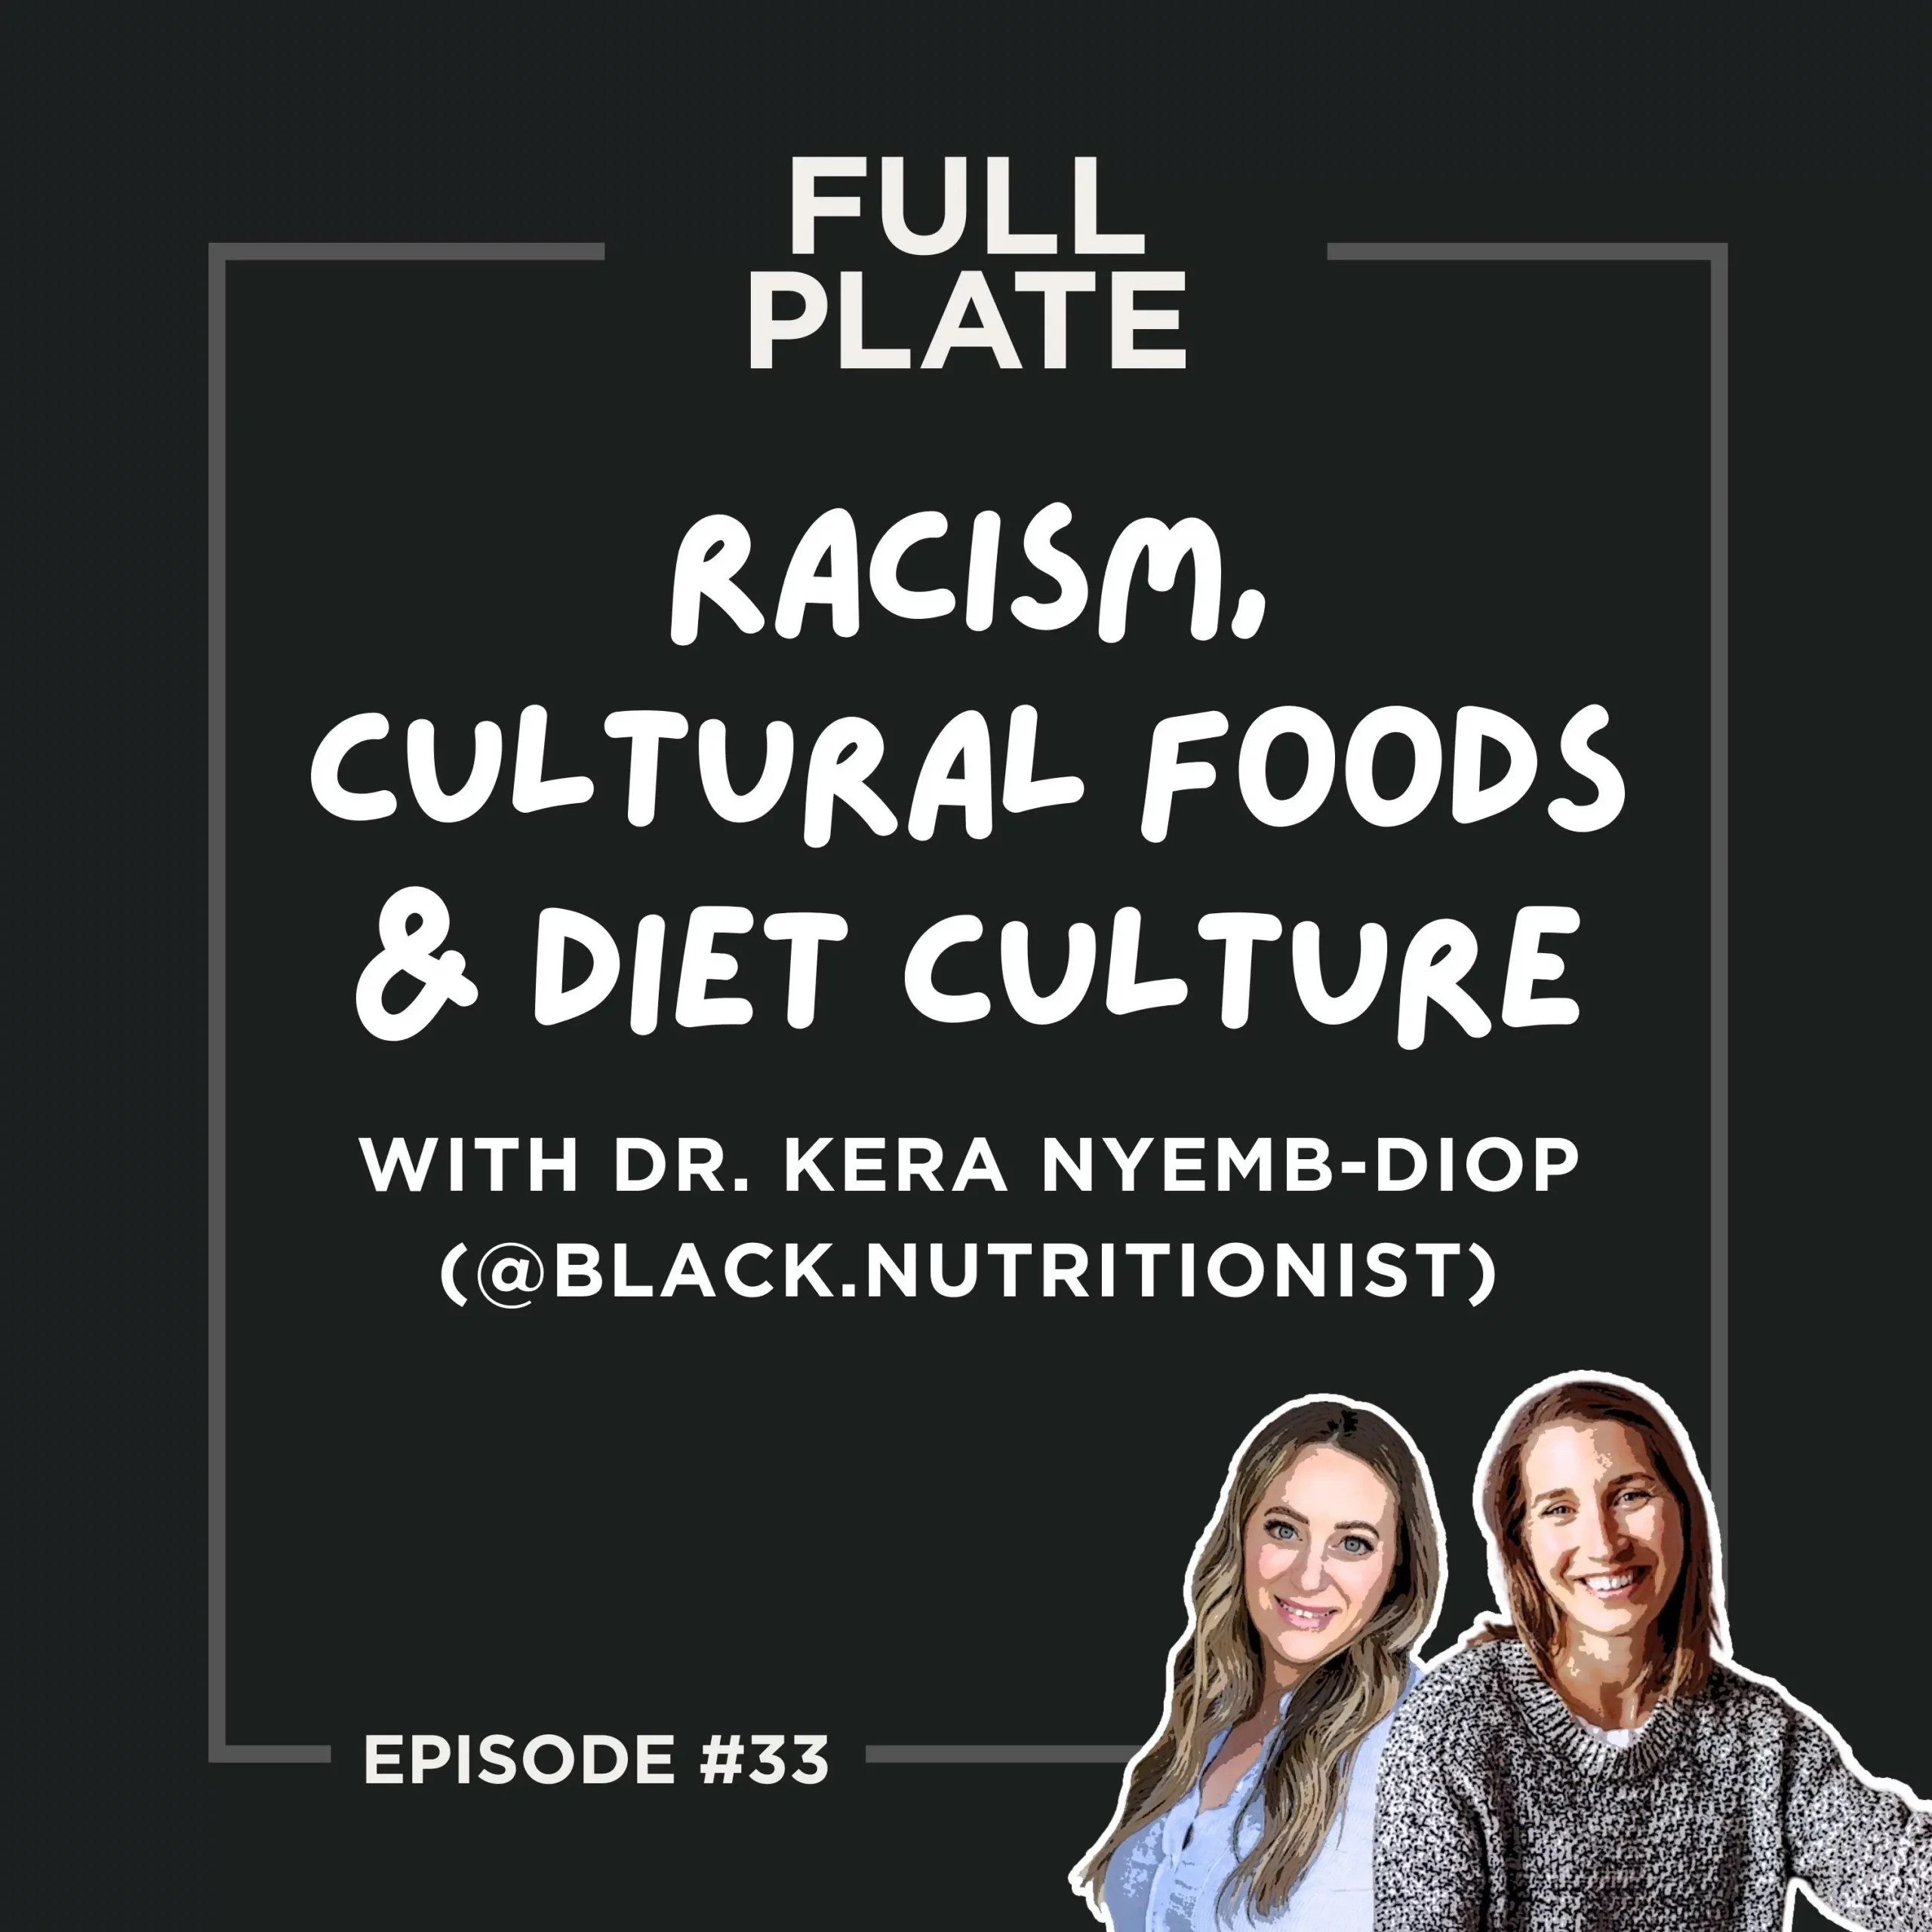 Full Plate Podcast | Ditch diet culture, respect your body, and set boundaries | Episode 33: Racism, Cultural Foods, & Diet Culture with Dr. Kera Nyermb-Diop